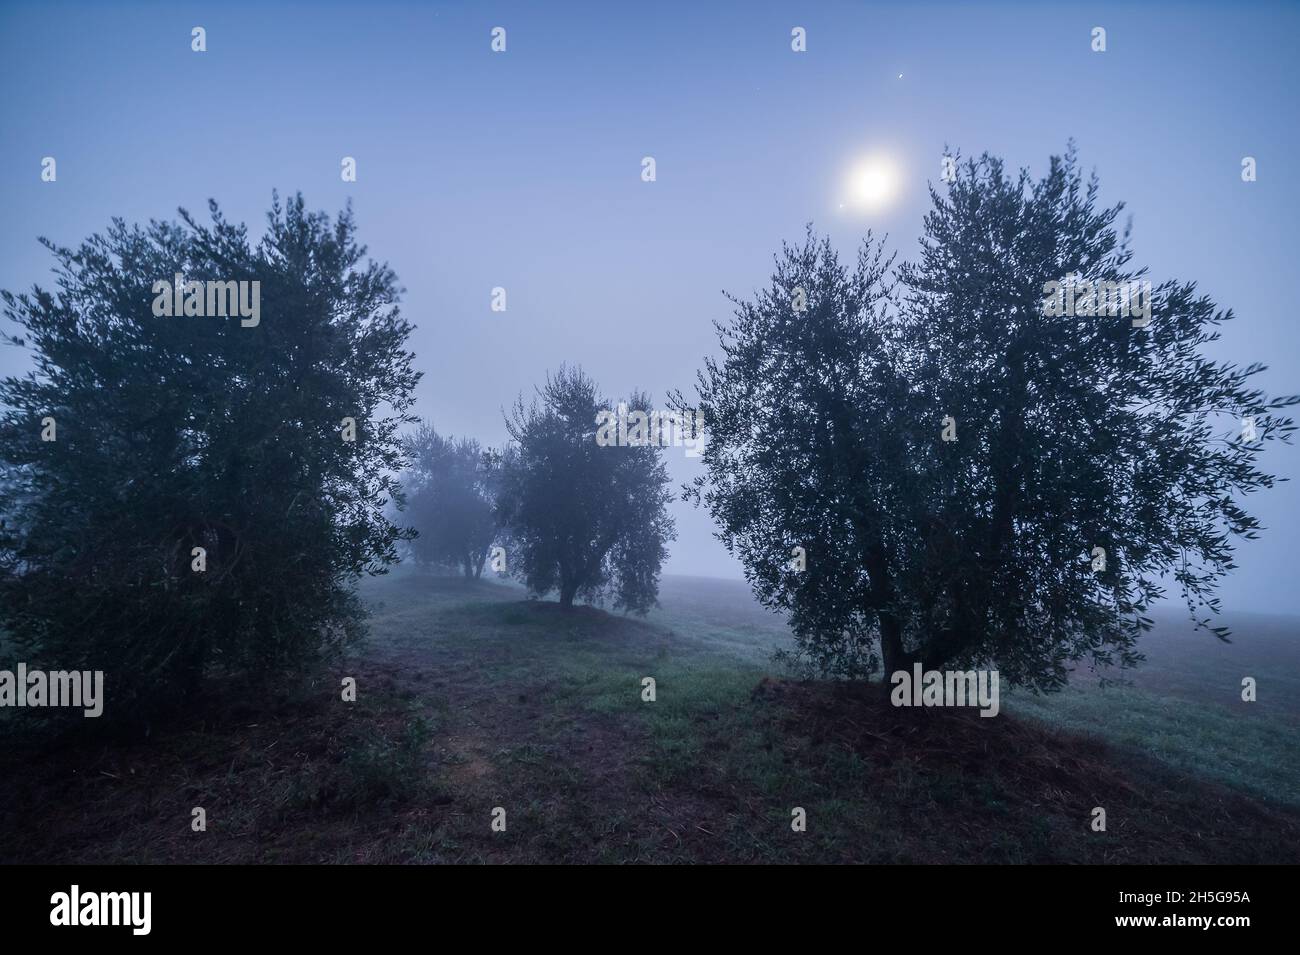 Olive garden at night in fog illuminated by the moon Stock Photo